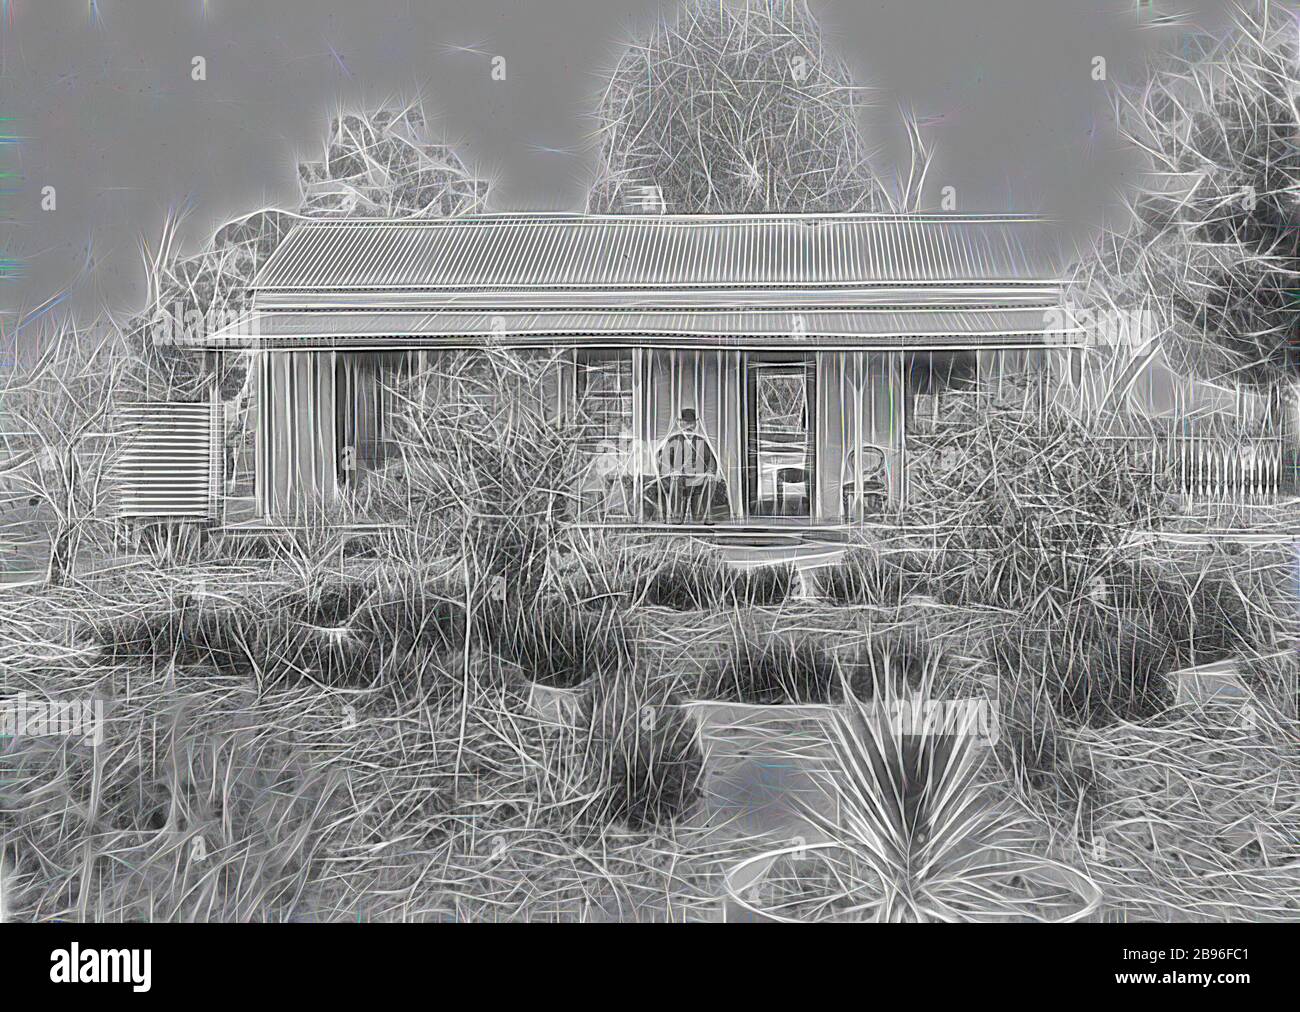 Negative - Bundalong, Victoria, 1907, A man seated on the verandah of a small house. The front door is open and the backyard can be seen through an open back door. There is a garden in front of the house and a water tank at the side., Reimagined by Gibon, design of warm cheerful glowing of brightness and light rays radiance. Classic art reinvented with a modern twist. Photography inspired by futurism, embracing dynamic energy of modern technology, movement, speed and revolutionize culture. Stock Photo